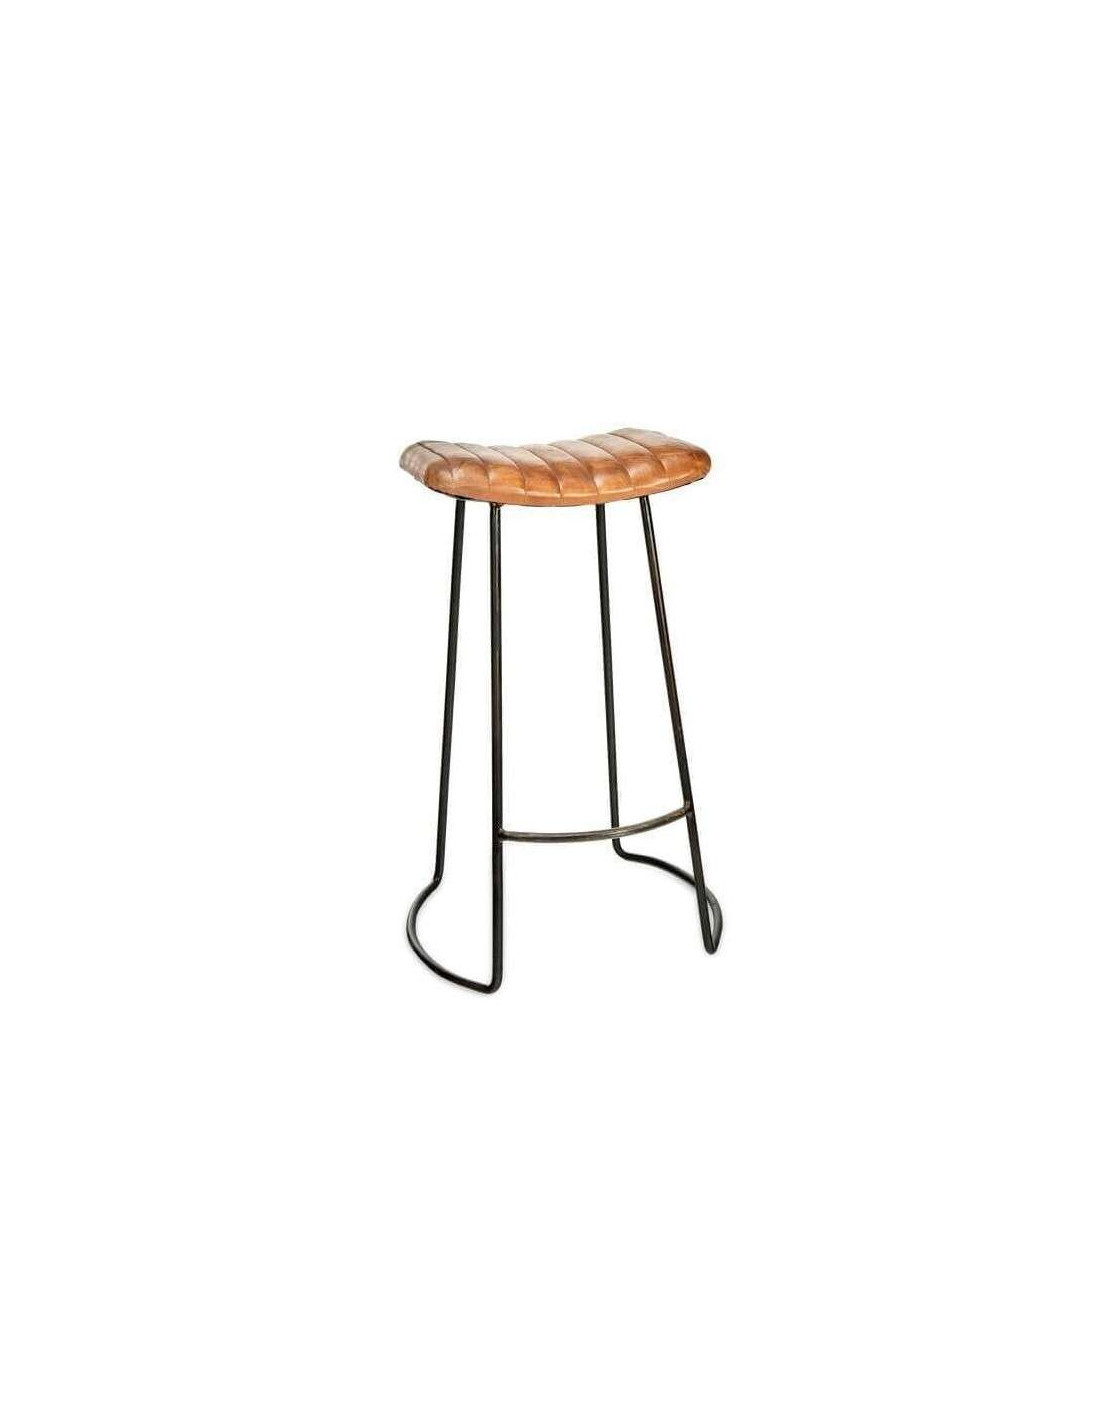 Tan Leather Ribbed Bar Stools with Iron Frame | Acc for ...